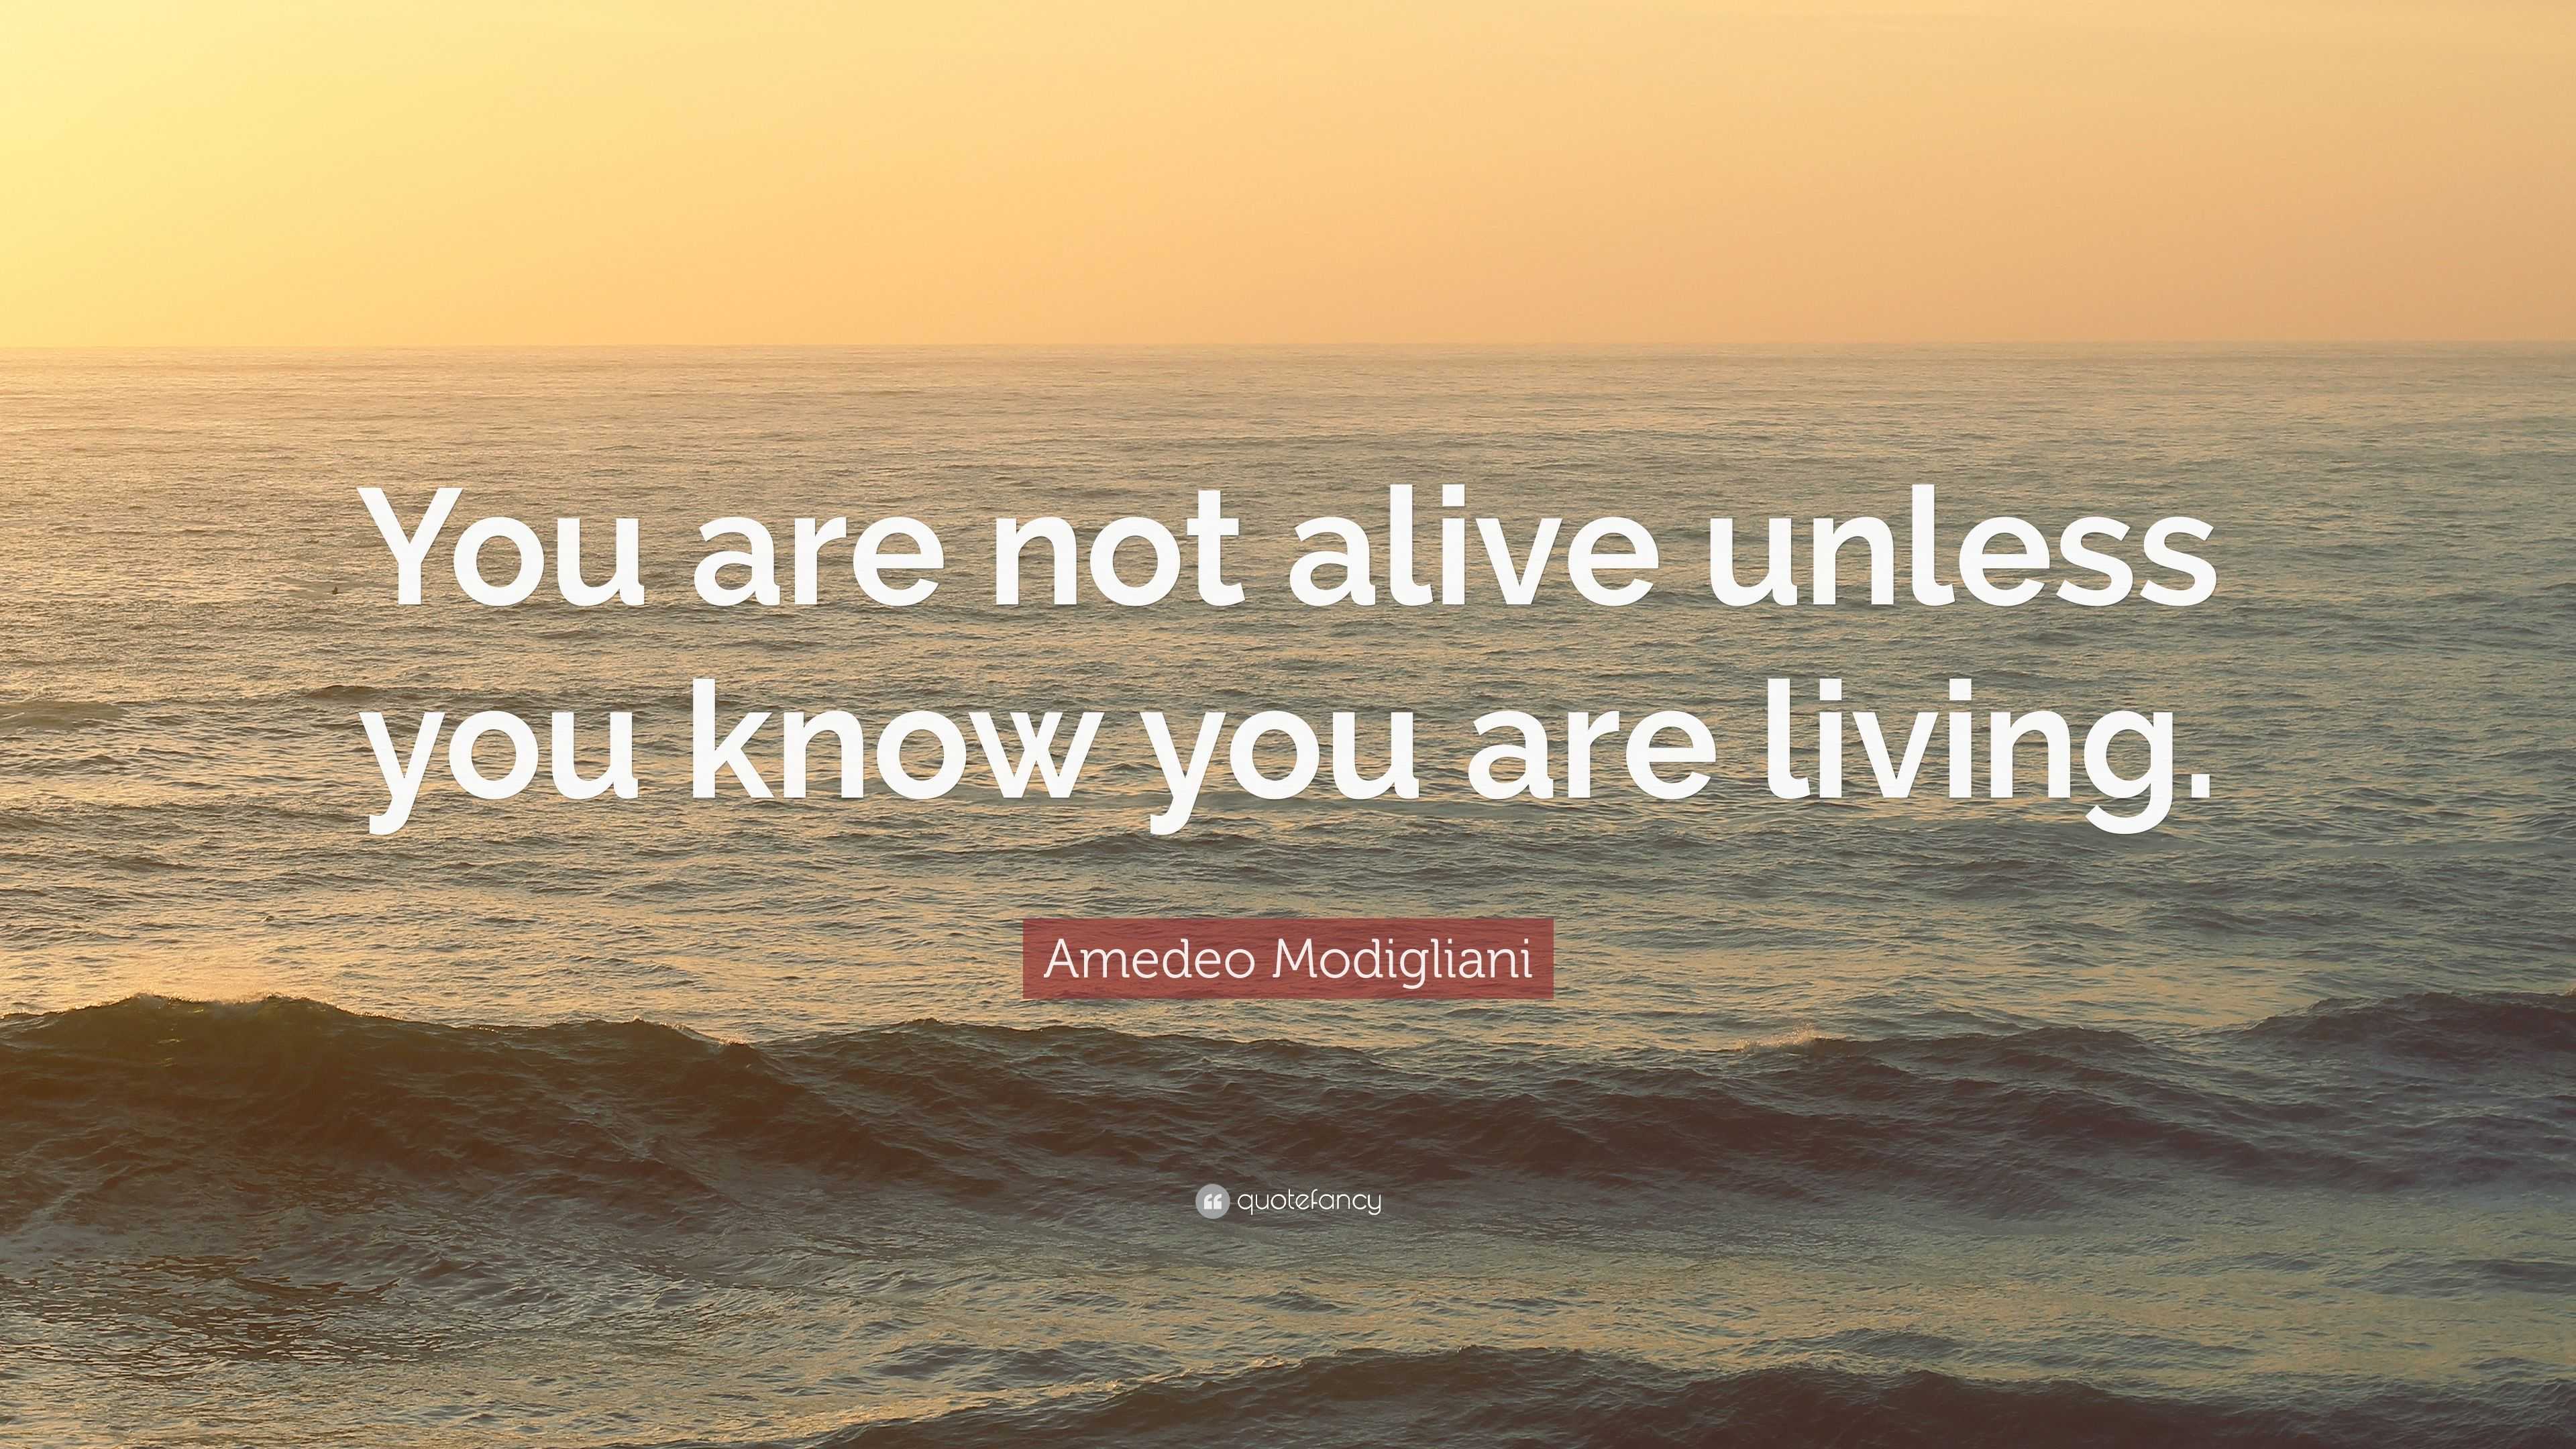 Amedeo Modigliani Quote You Are Not Alive Unless You Know You Are Living